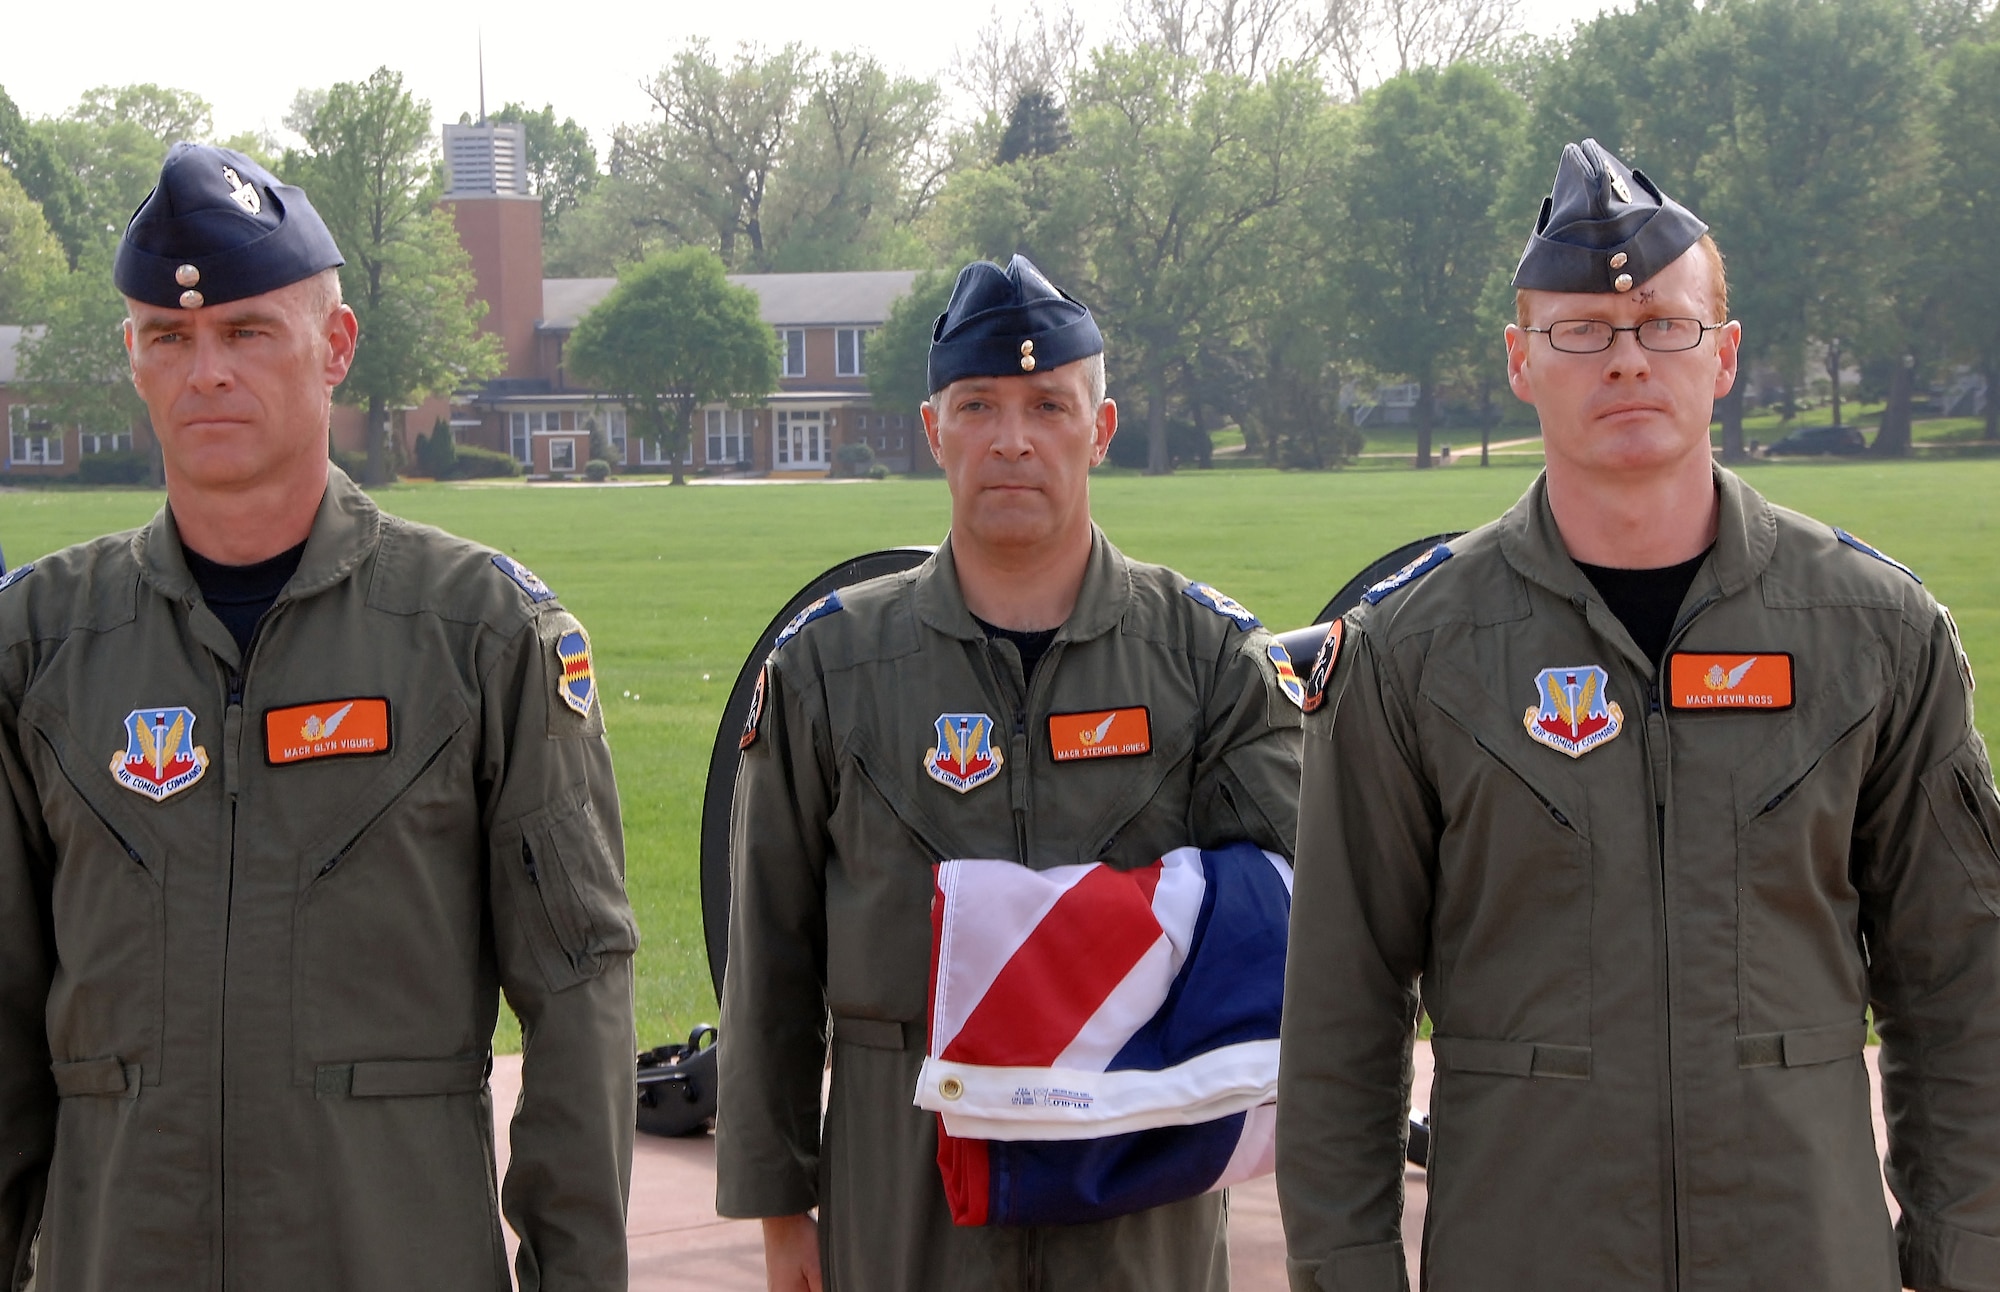 OFFUTT AIR FORCE BASE, Neb. -- Royal Air Force members Master Aircrew Glyn Vigurs, Master Aircrew Stephen Jones and Master Aircrew Kevin Ross stand at attention after lowering the United Kingdom flag during a special retreat ceremony here May 18. The RAF members are attending RC-135V/W initial qualification training here and joined with other members of the 338th Combat Training Squadron in the special ceremony at the parade grounds. (Air Force photo by Dana Heard)